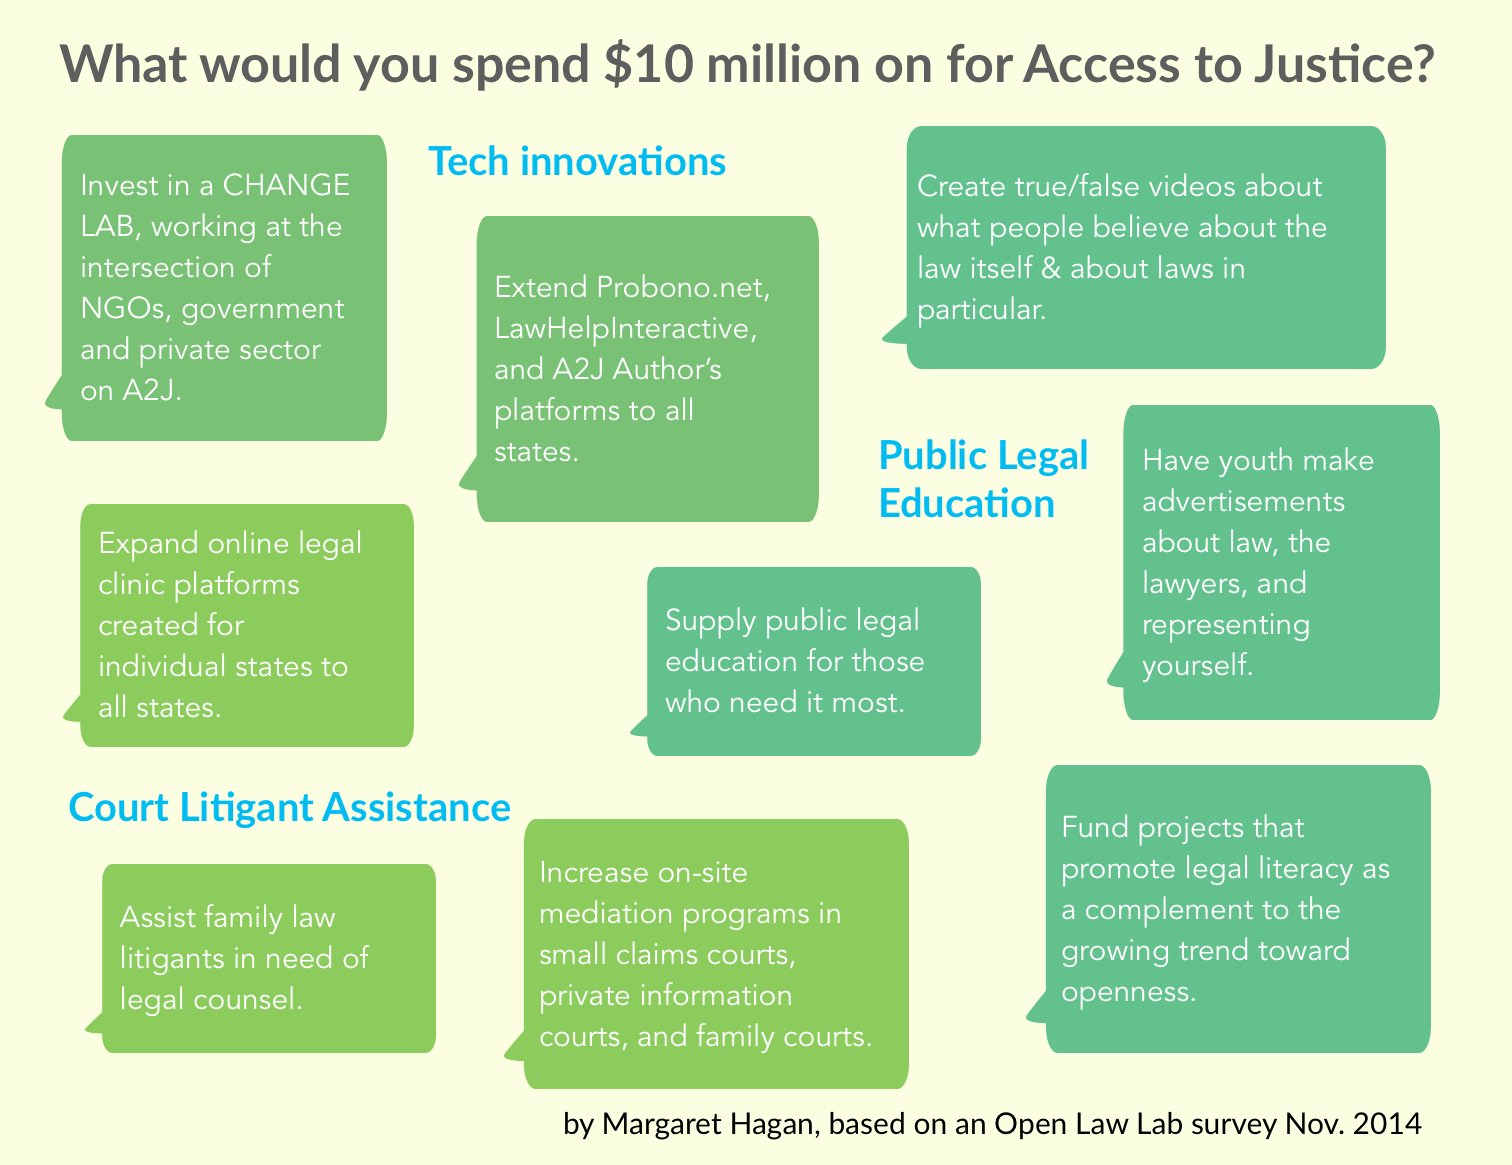 Access to Justice - where would you spend 10 million